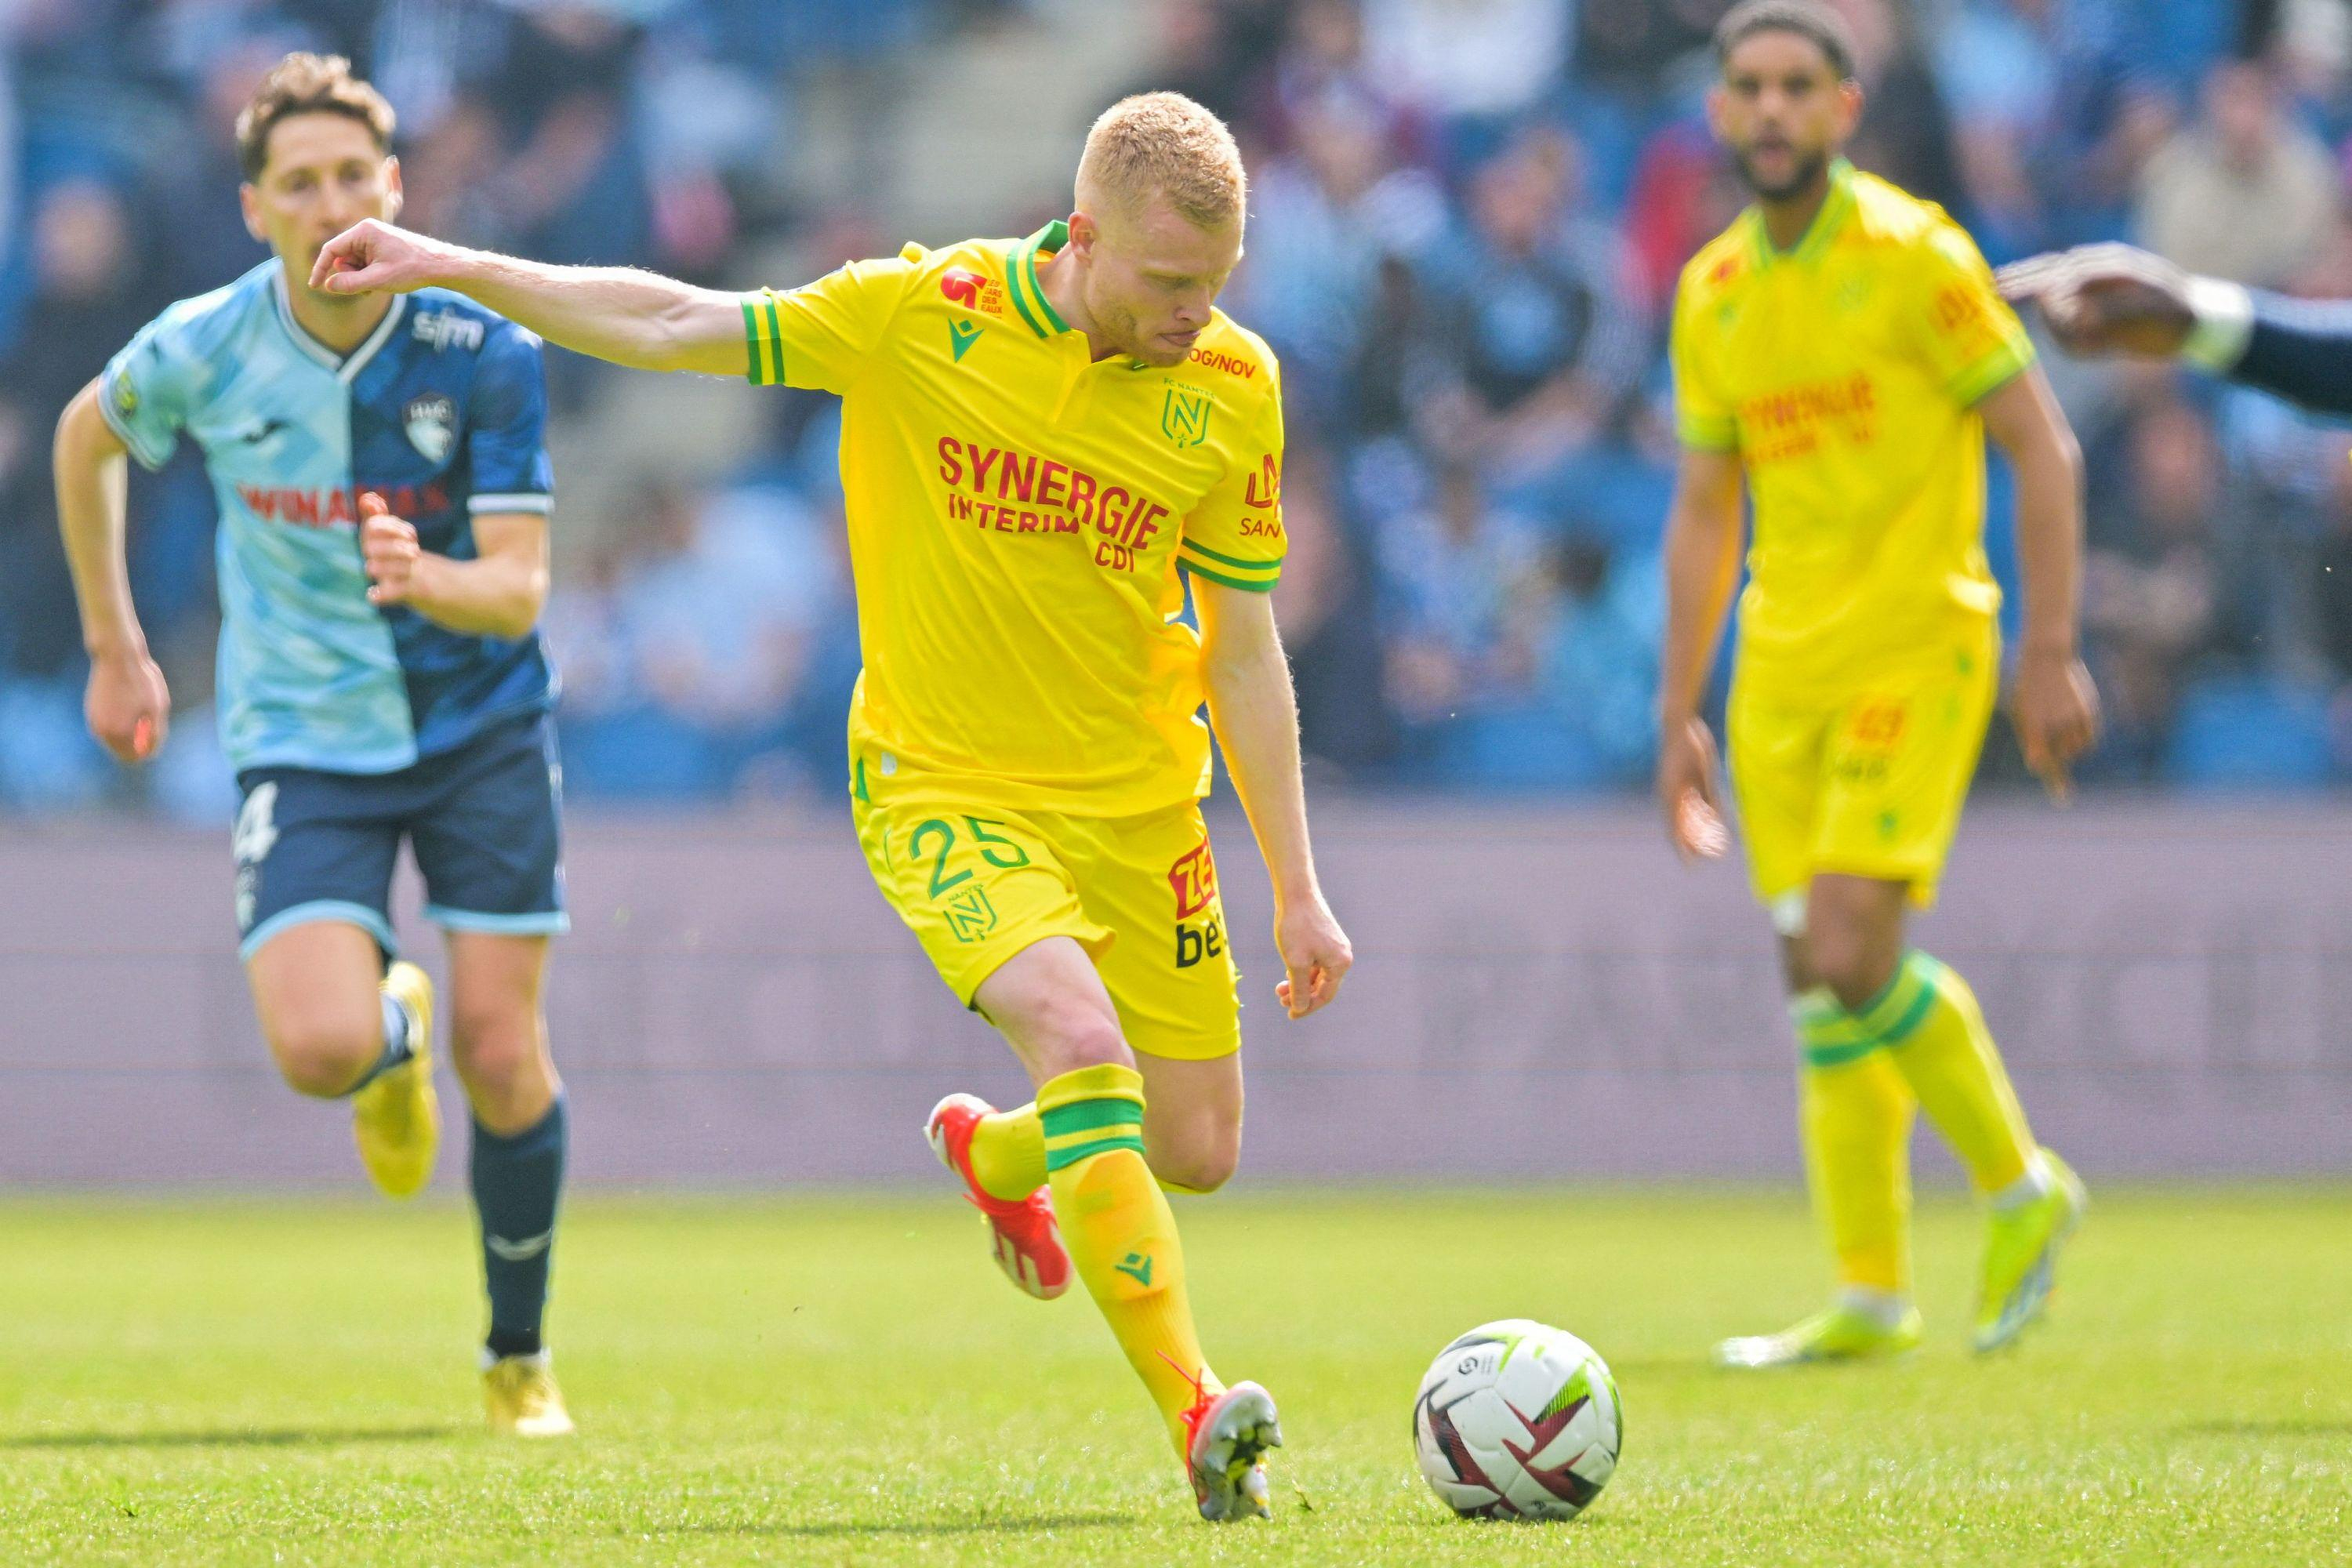 Ligue 1: Nantes wins after added time against Le Havre